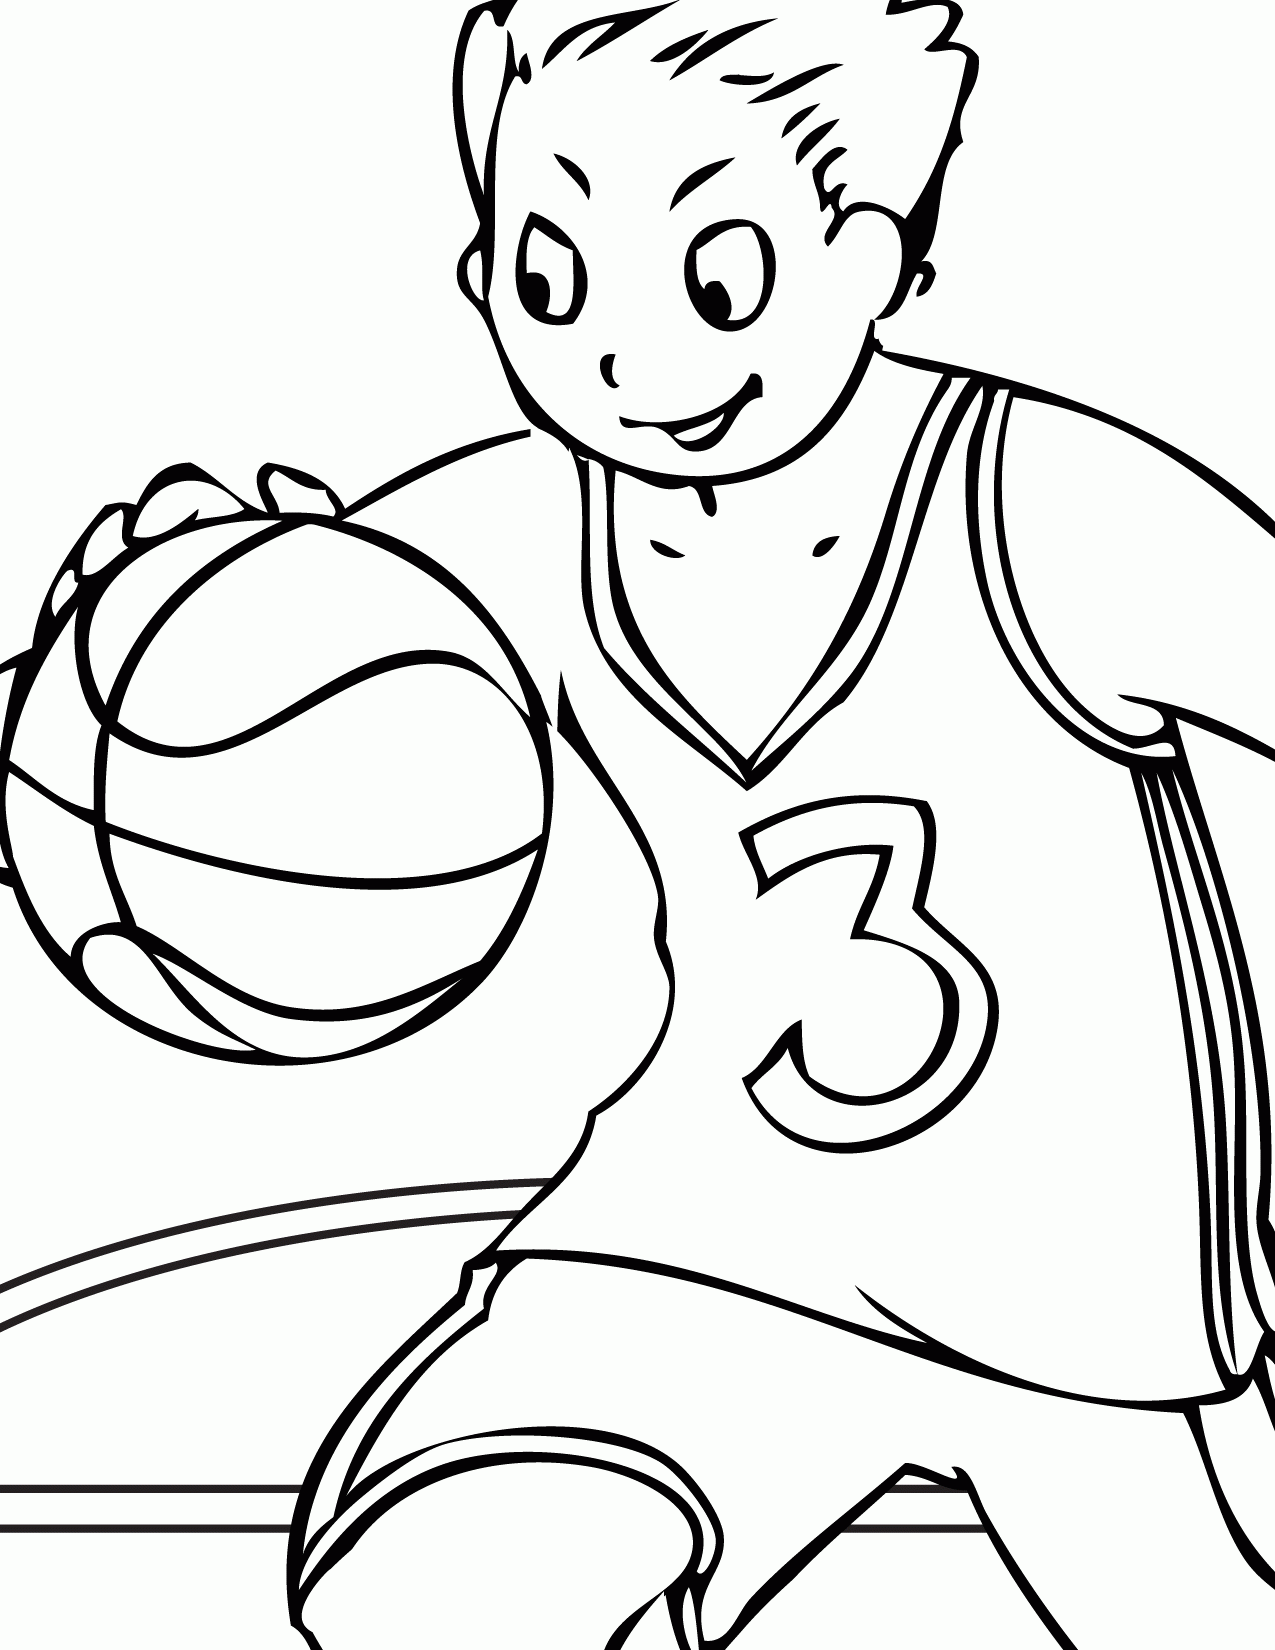 Coloring Pages Of Kids Playing Sports - Coloring Home